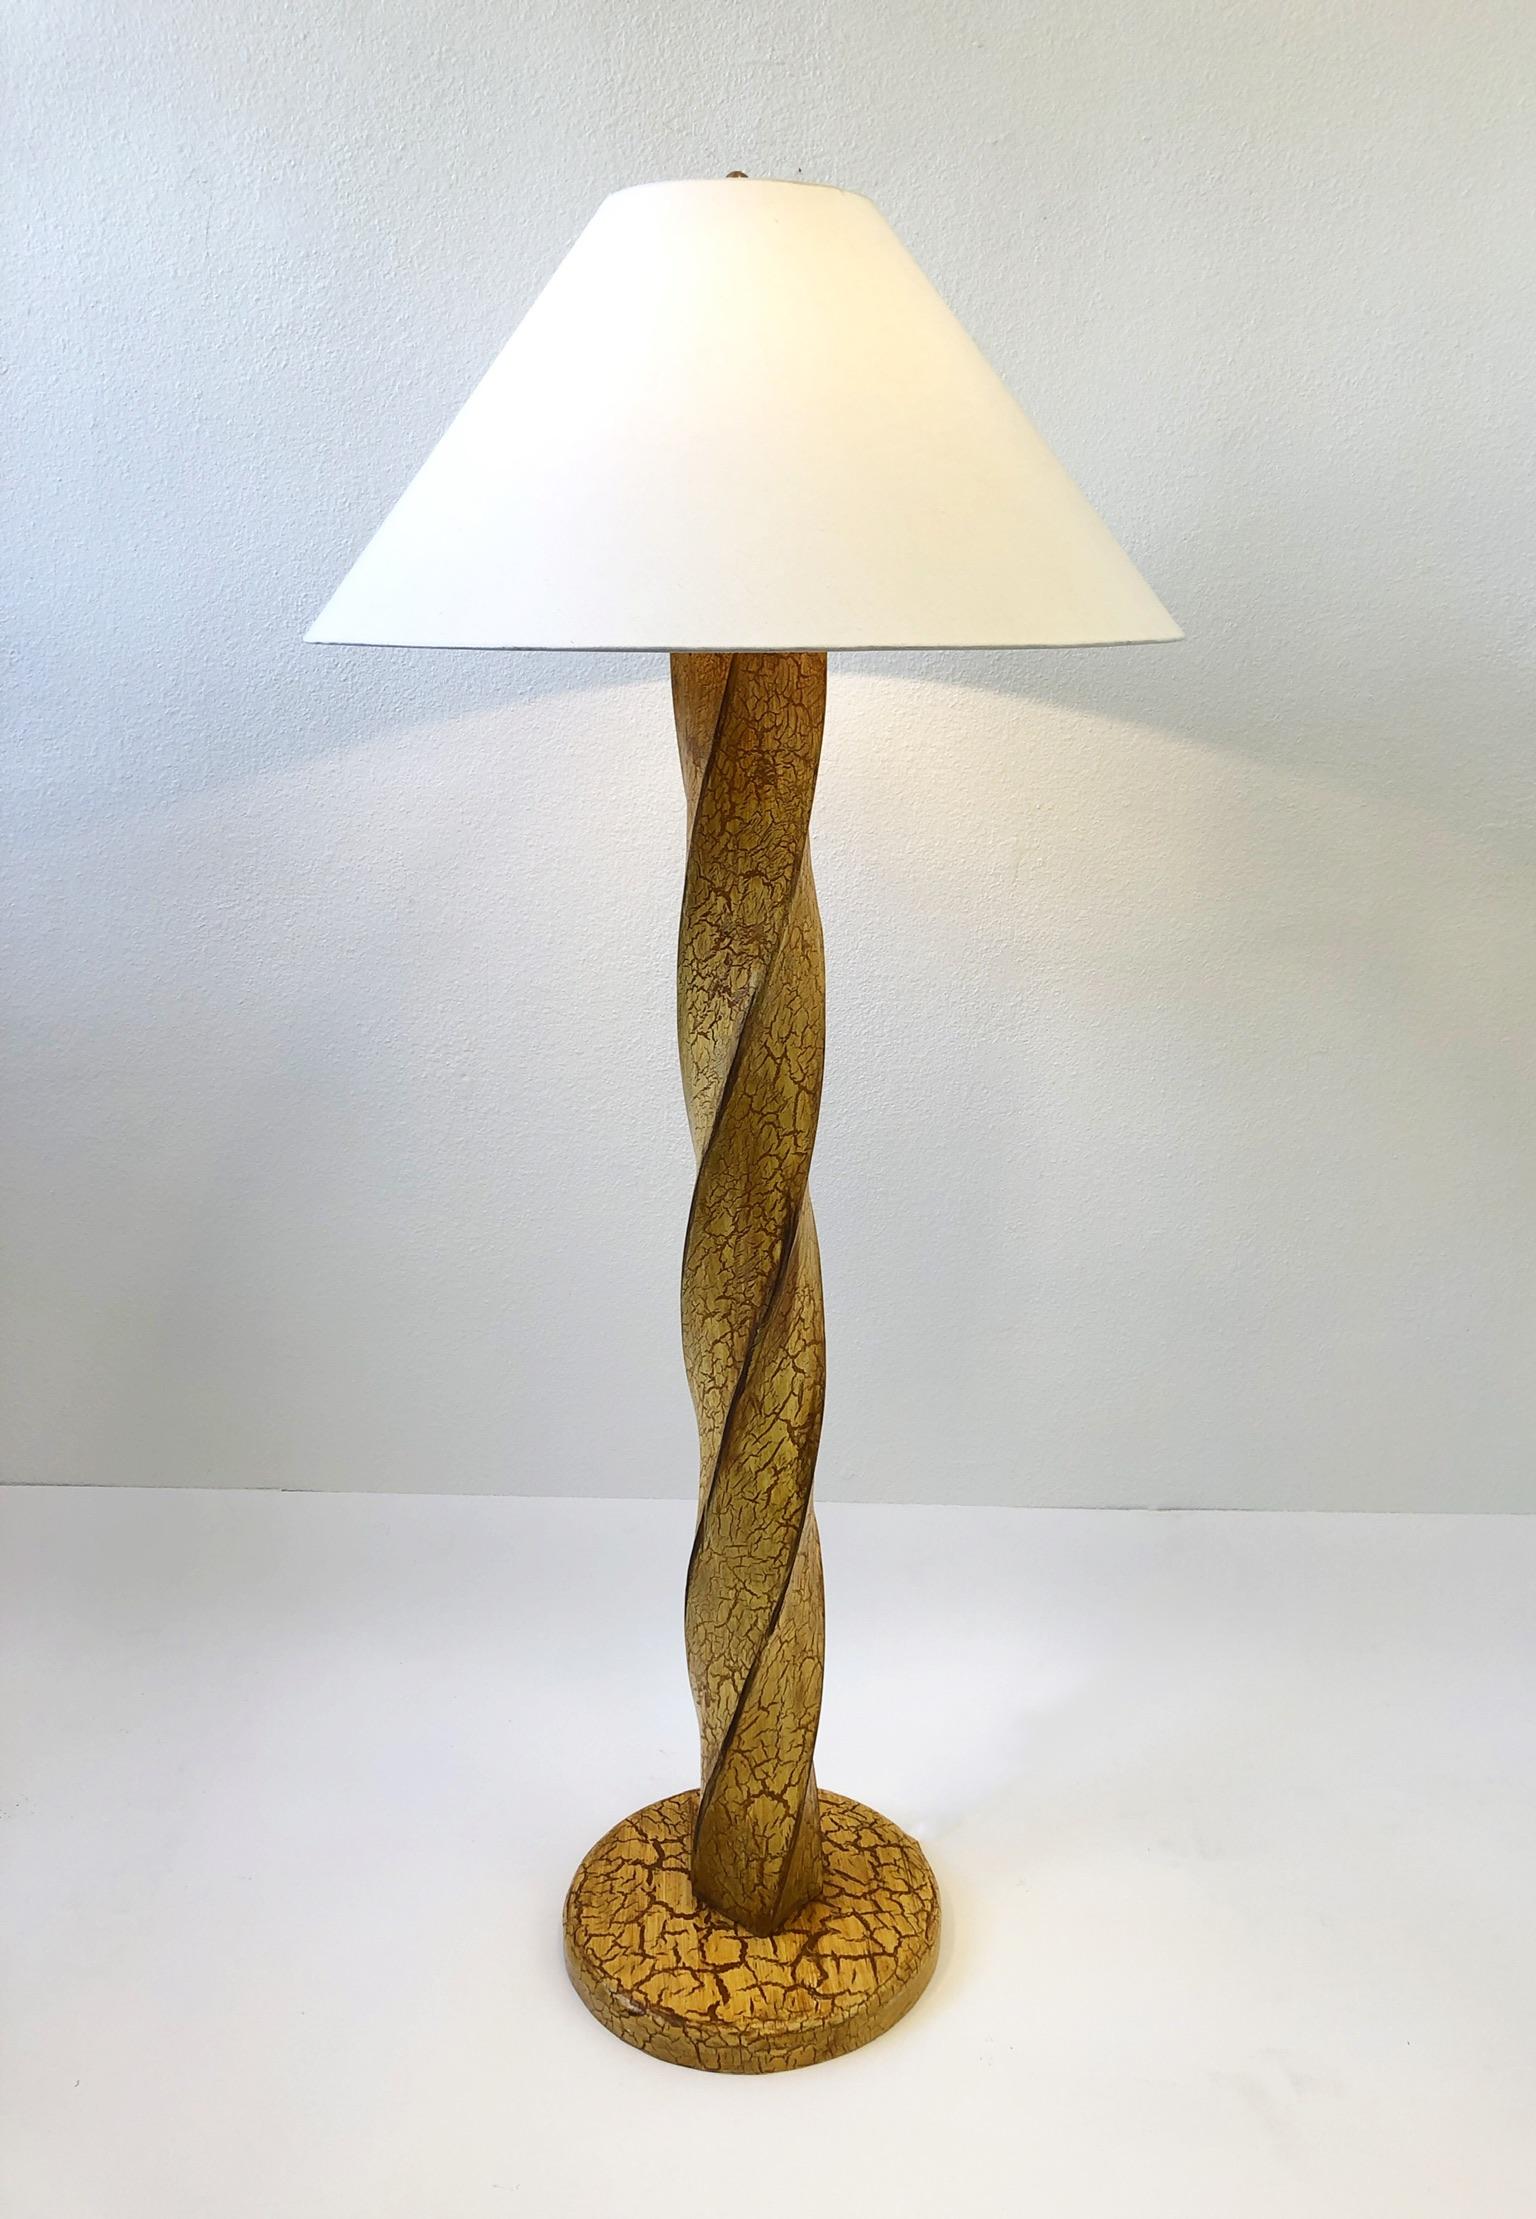 Modern Pair of Hand Carved Wood Floor Lamps by Dana Creath Designs for Steve Chase